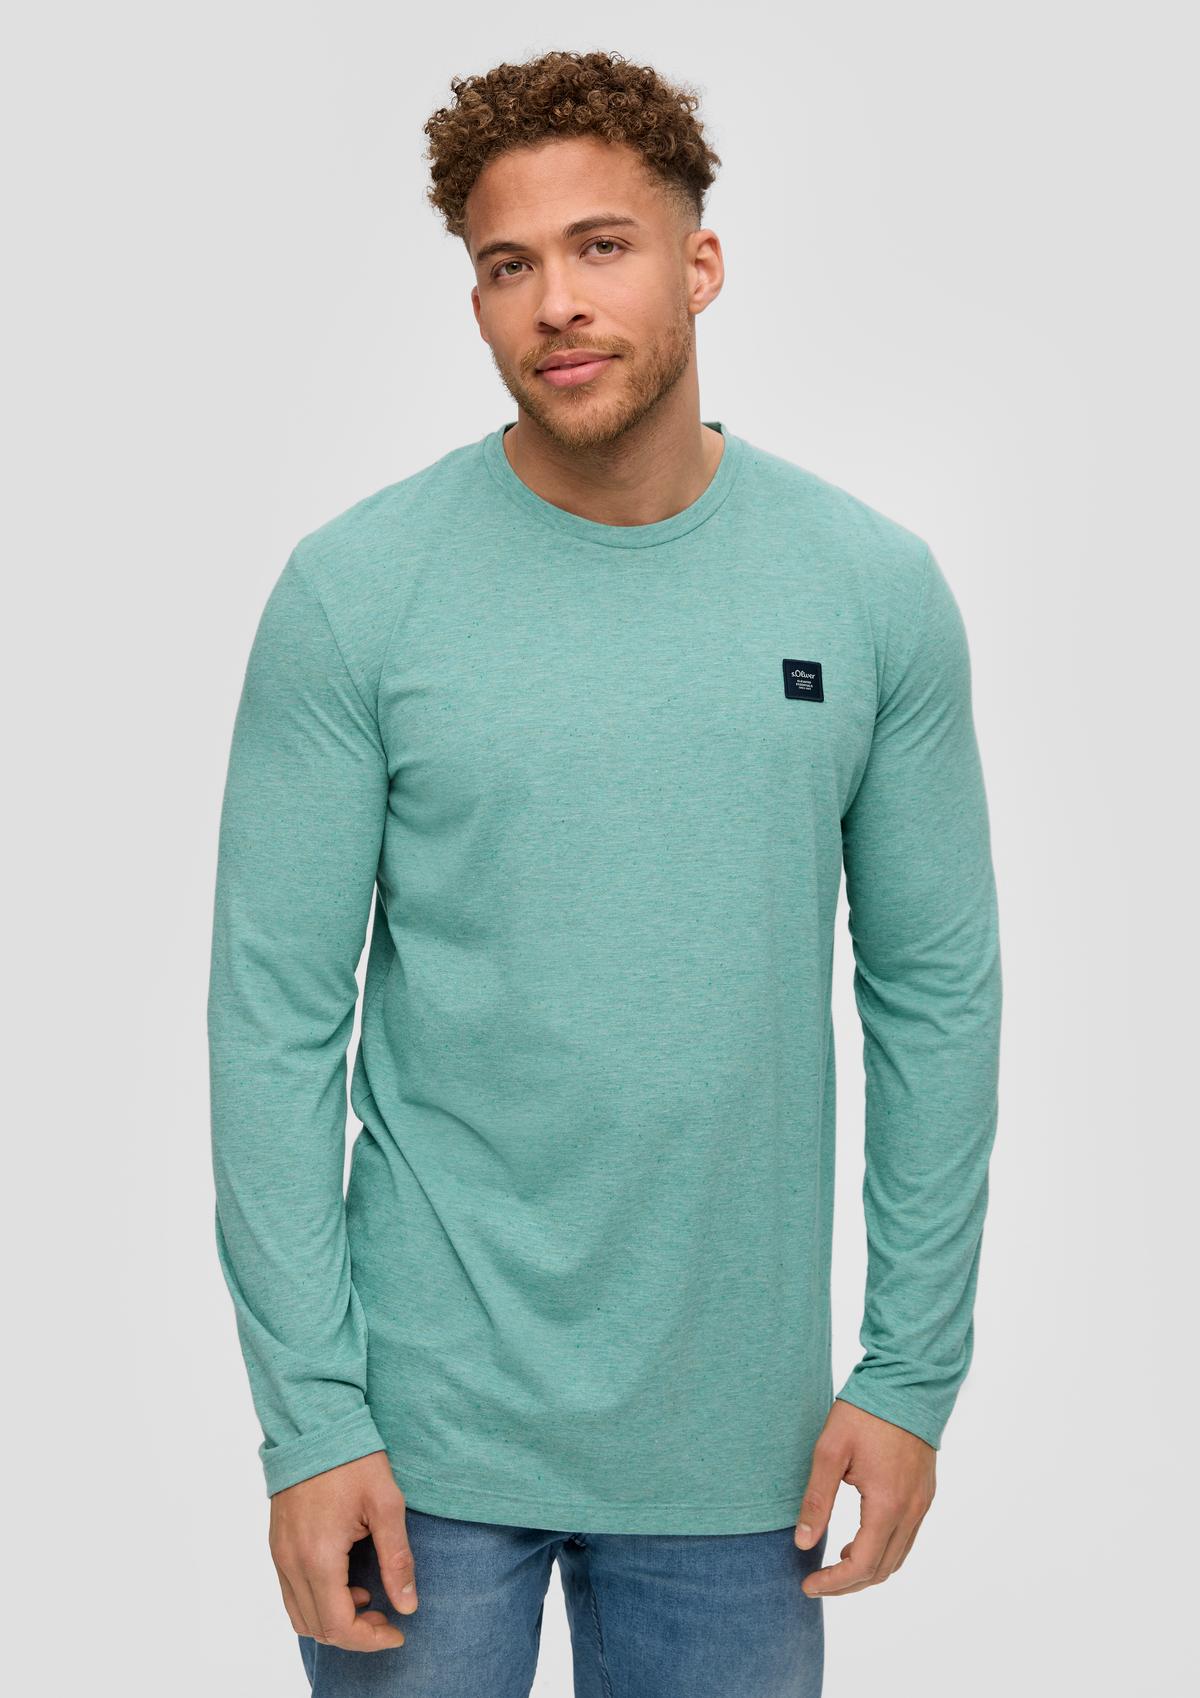 Long sleeve top green rolled - hem with sage a